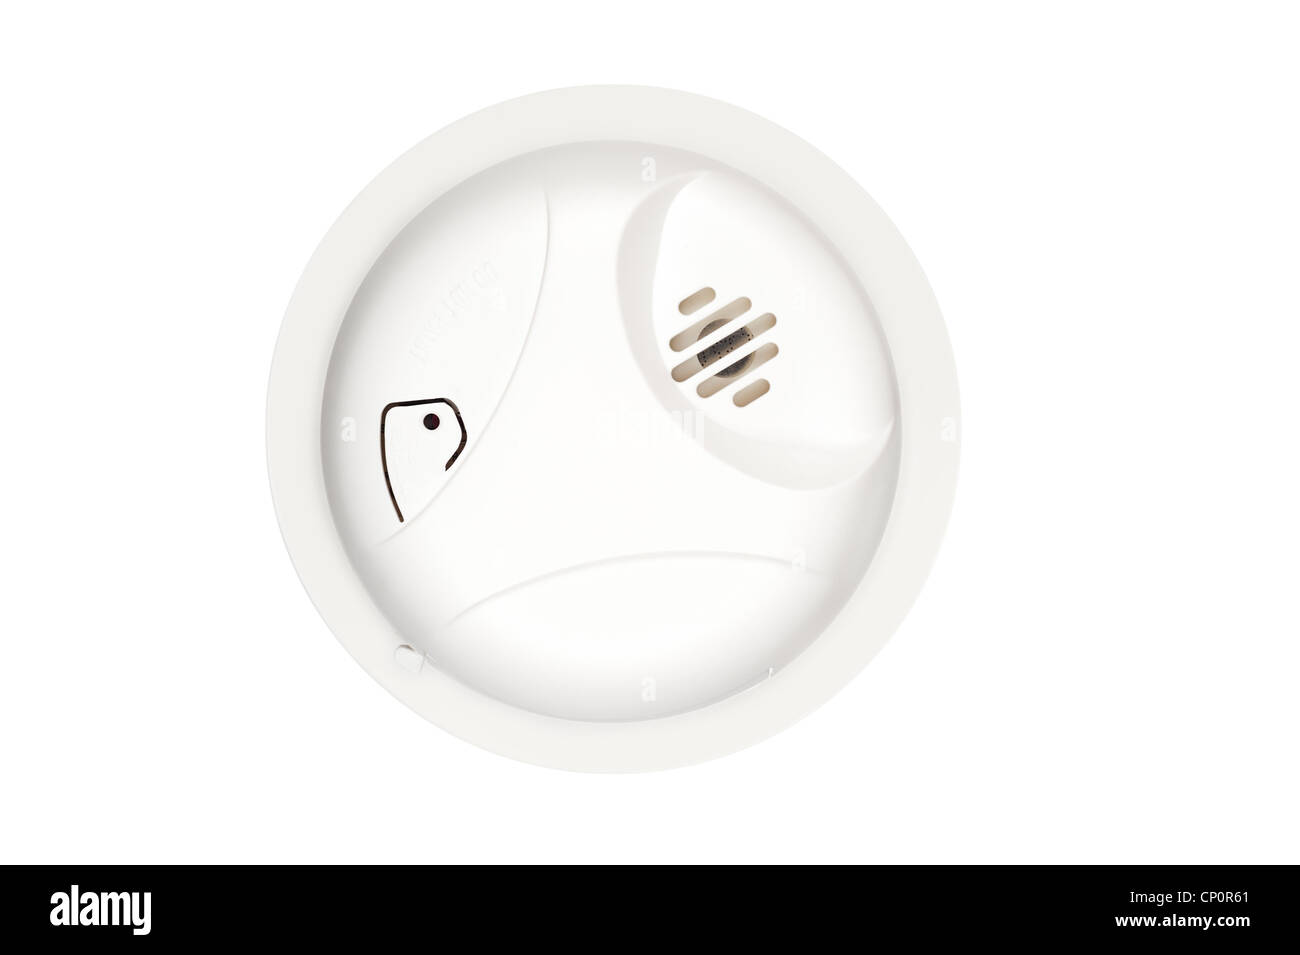 A new, isolated home smoke and fire alarm with carbon monoxide sensor capability Stock Photo